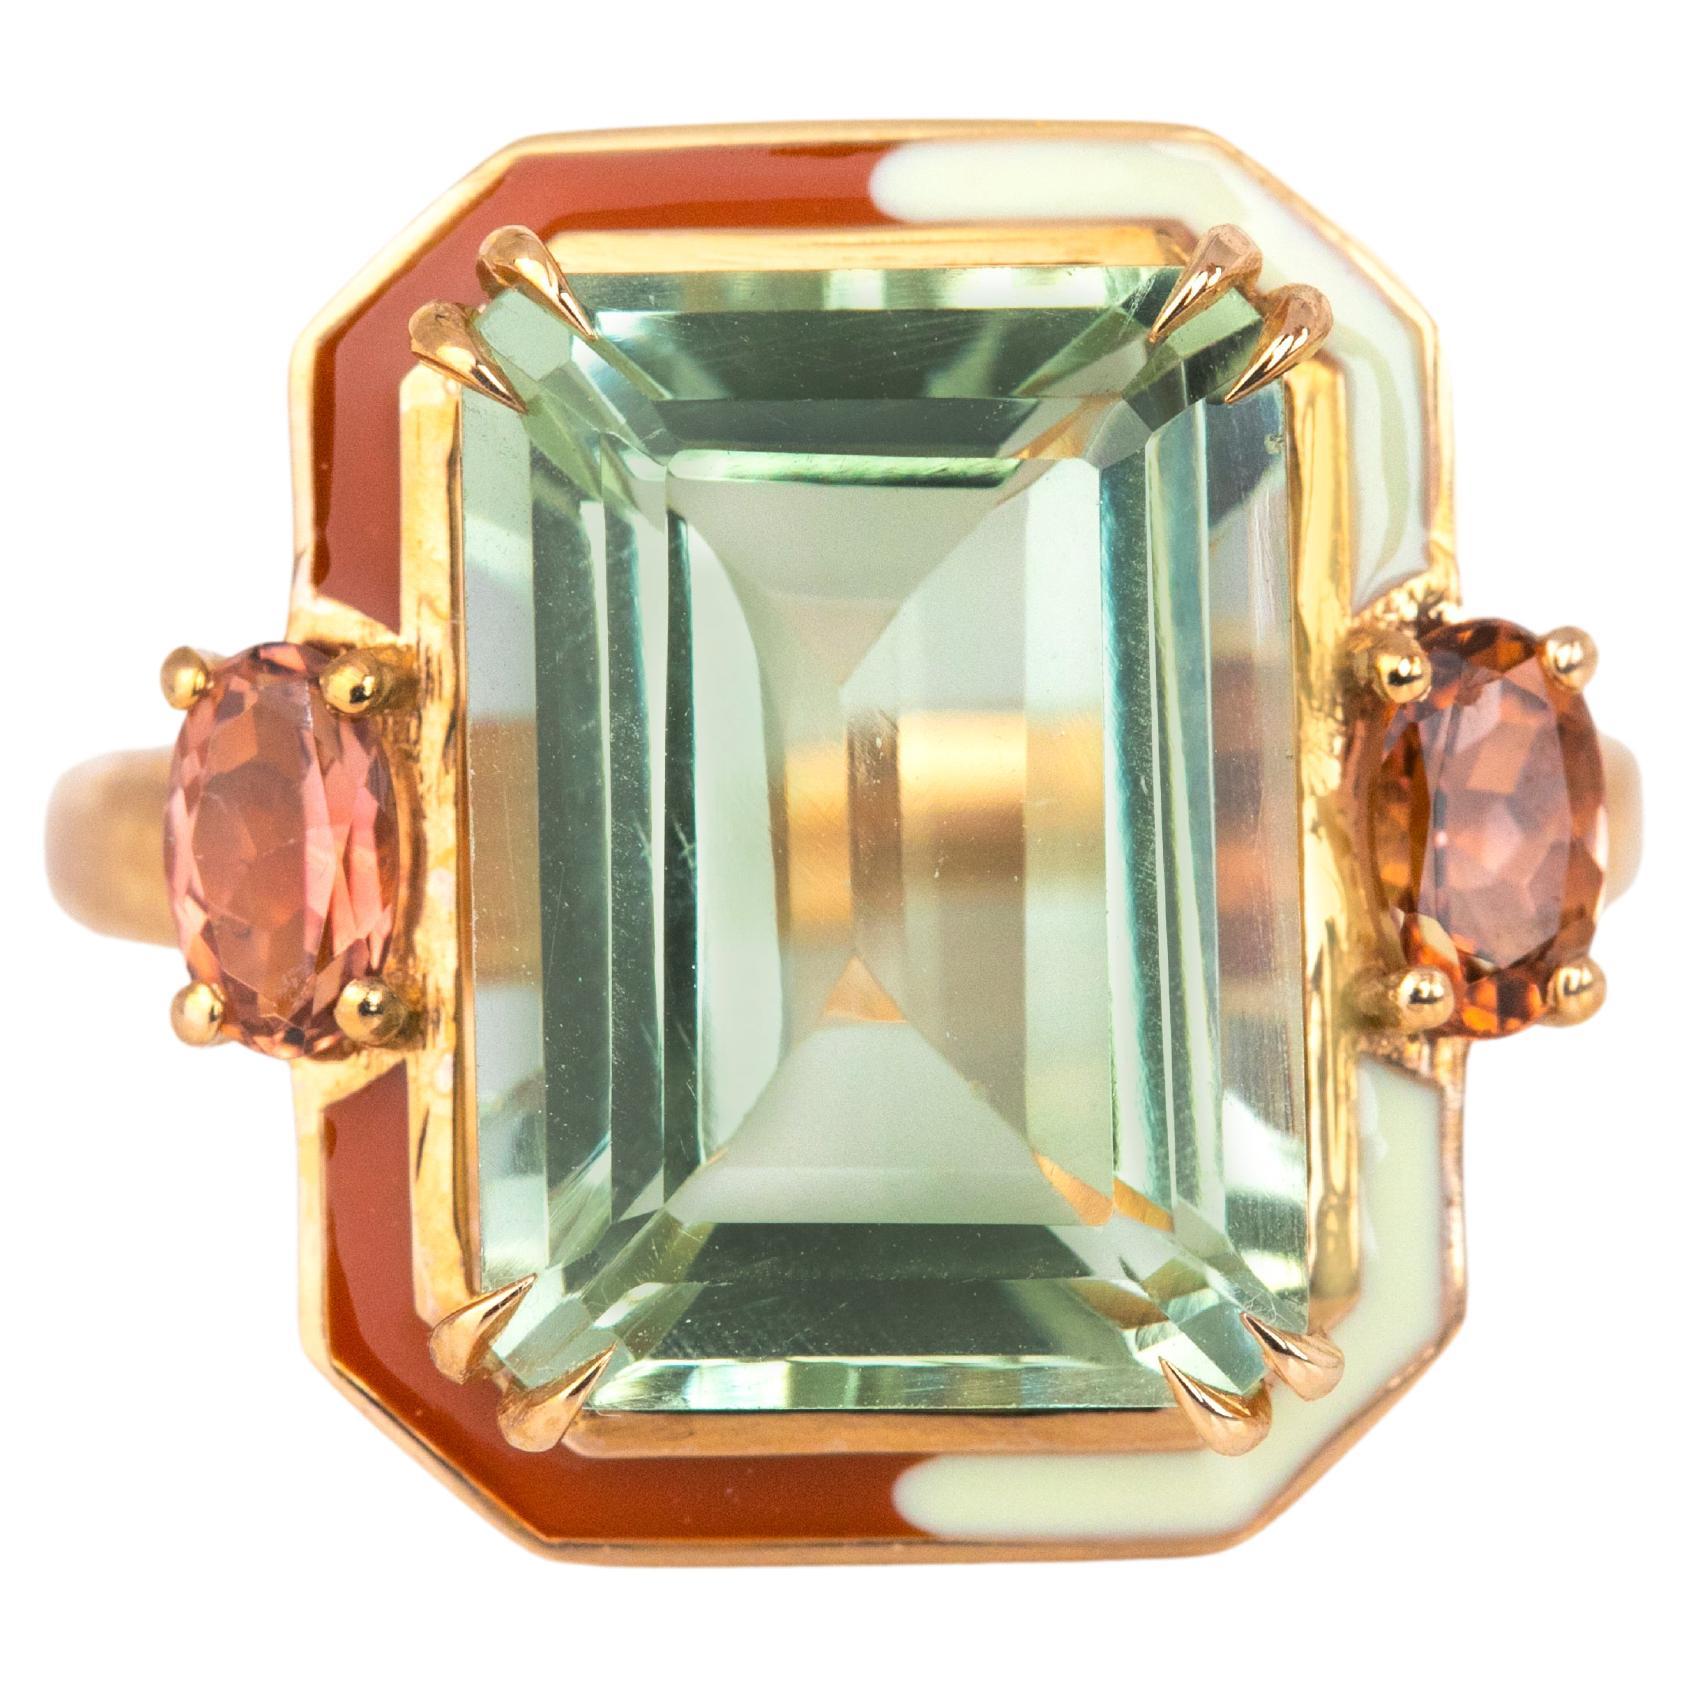 Artdeco Style Ring, 14k Solid Gold, Green Amethyst and Pink Tourmaline Stone Ring